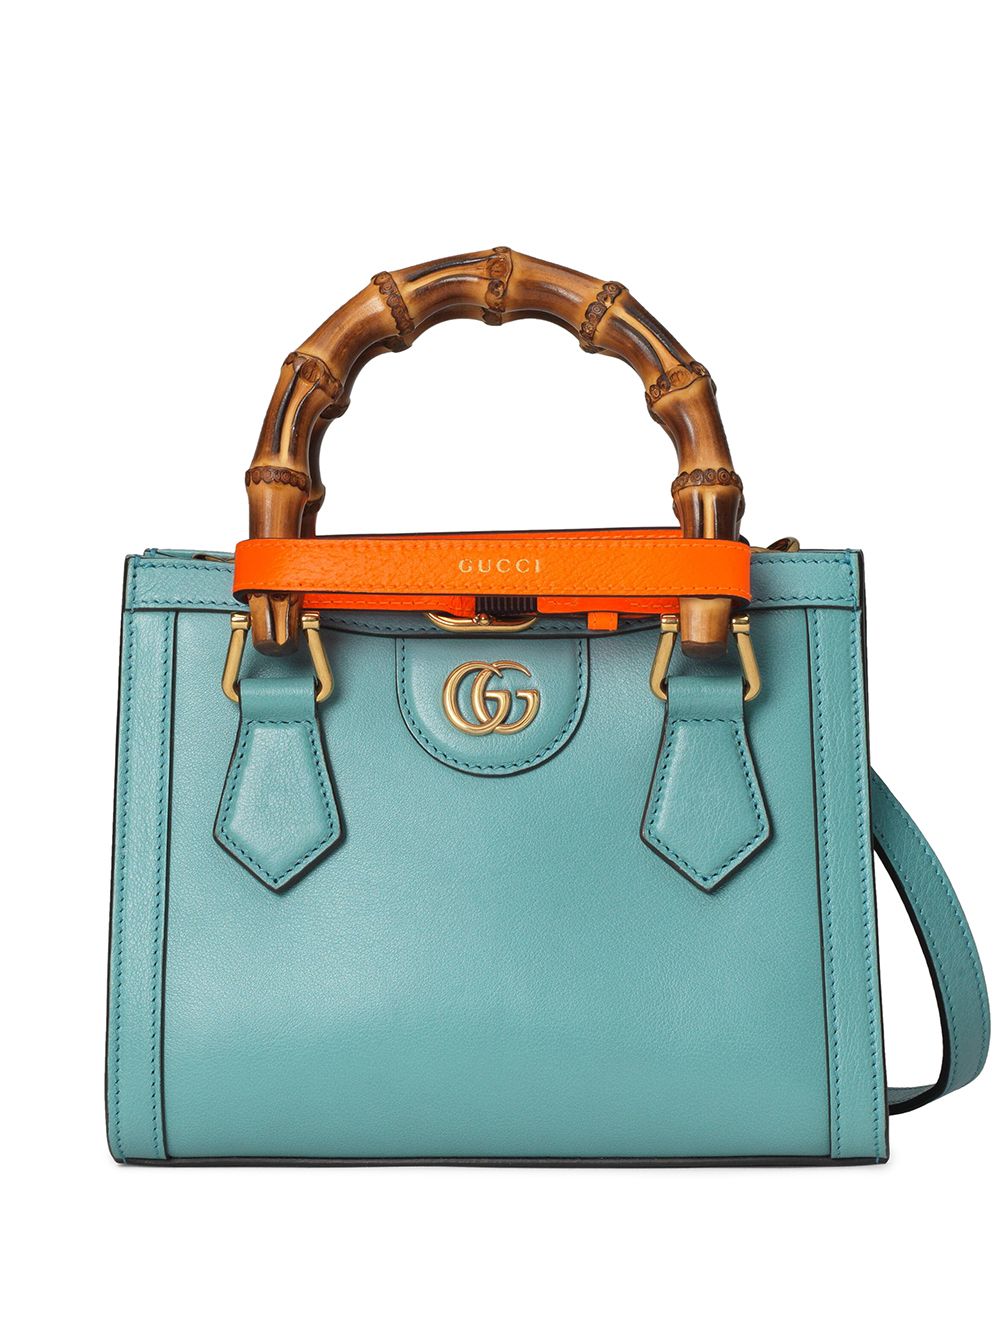 Gucci Bamboo Top-handle Limited Edition Shoulder Bag 25% off retail